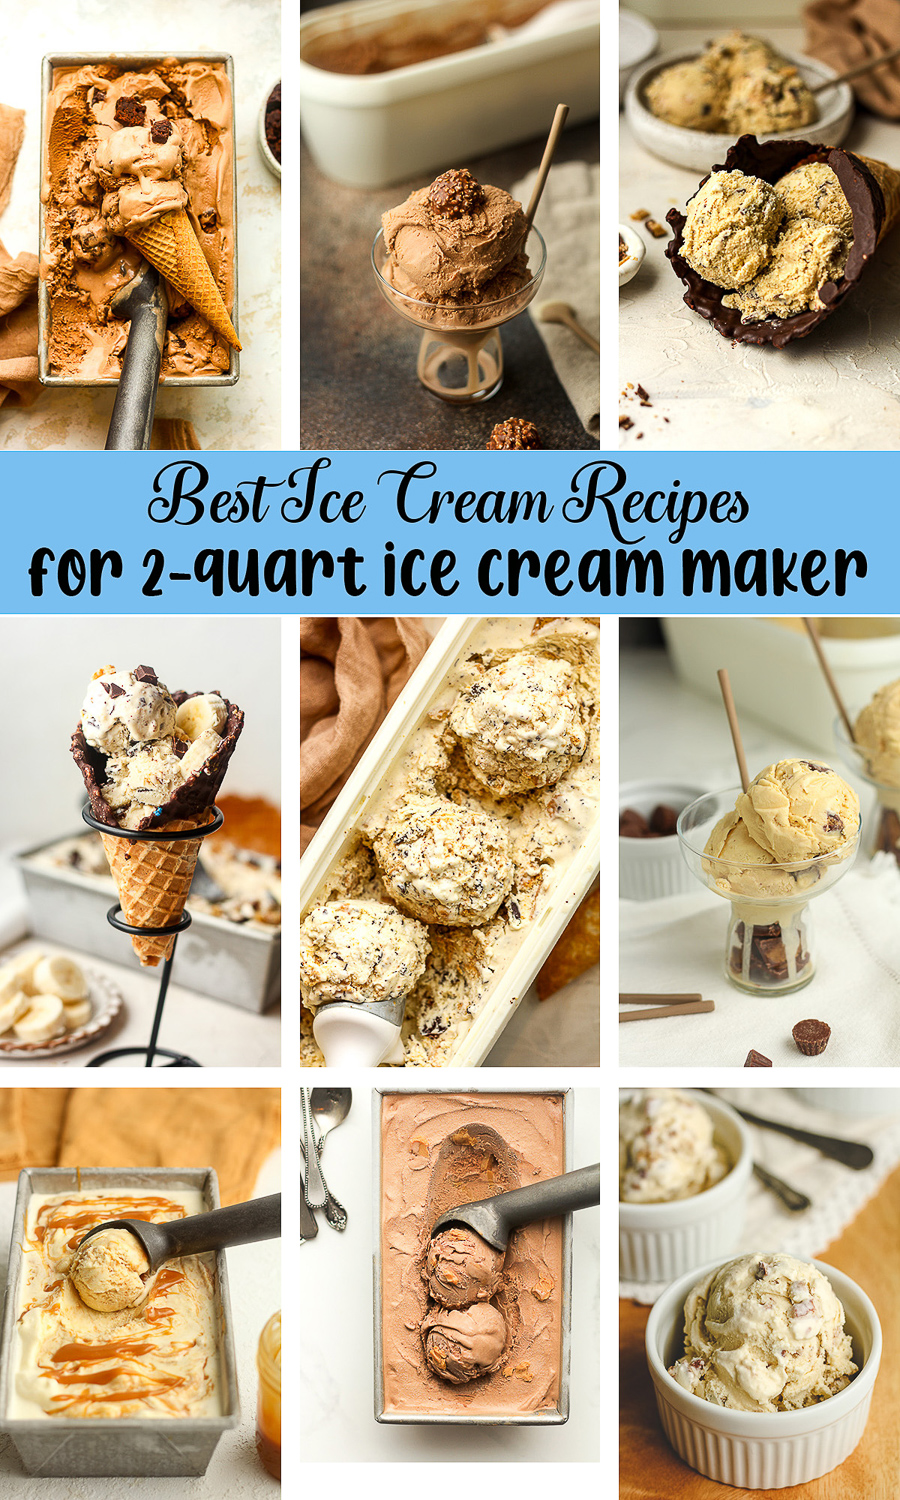 A collage of the best ice cream recipes for a 2-quart ice cream maker.